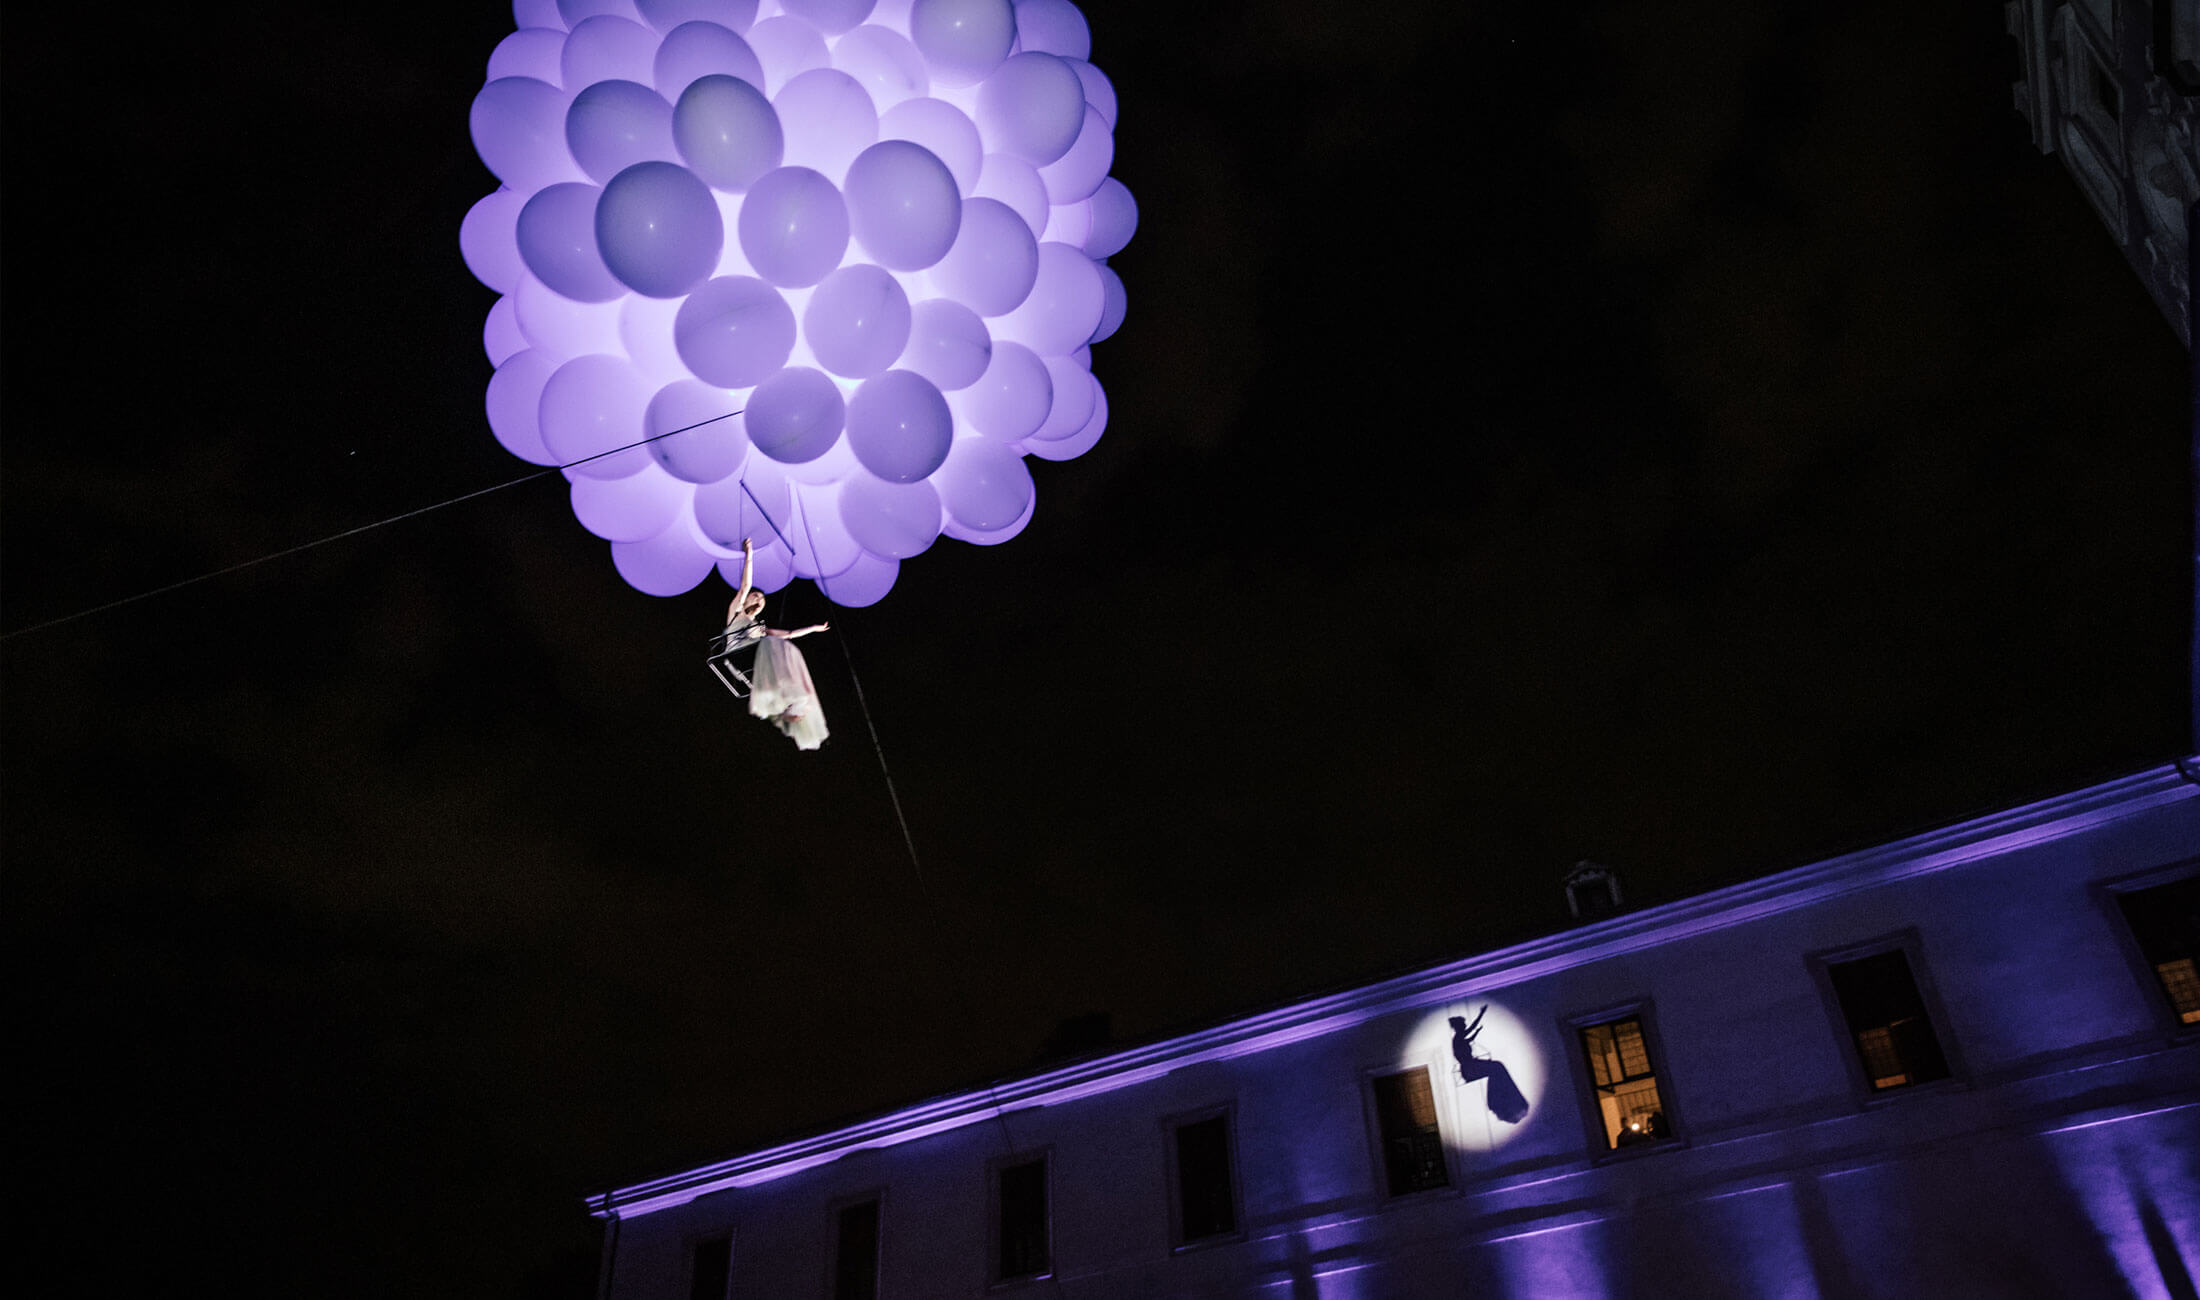 Opera singer suspended by balloons and lit with purple light in Rome